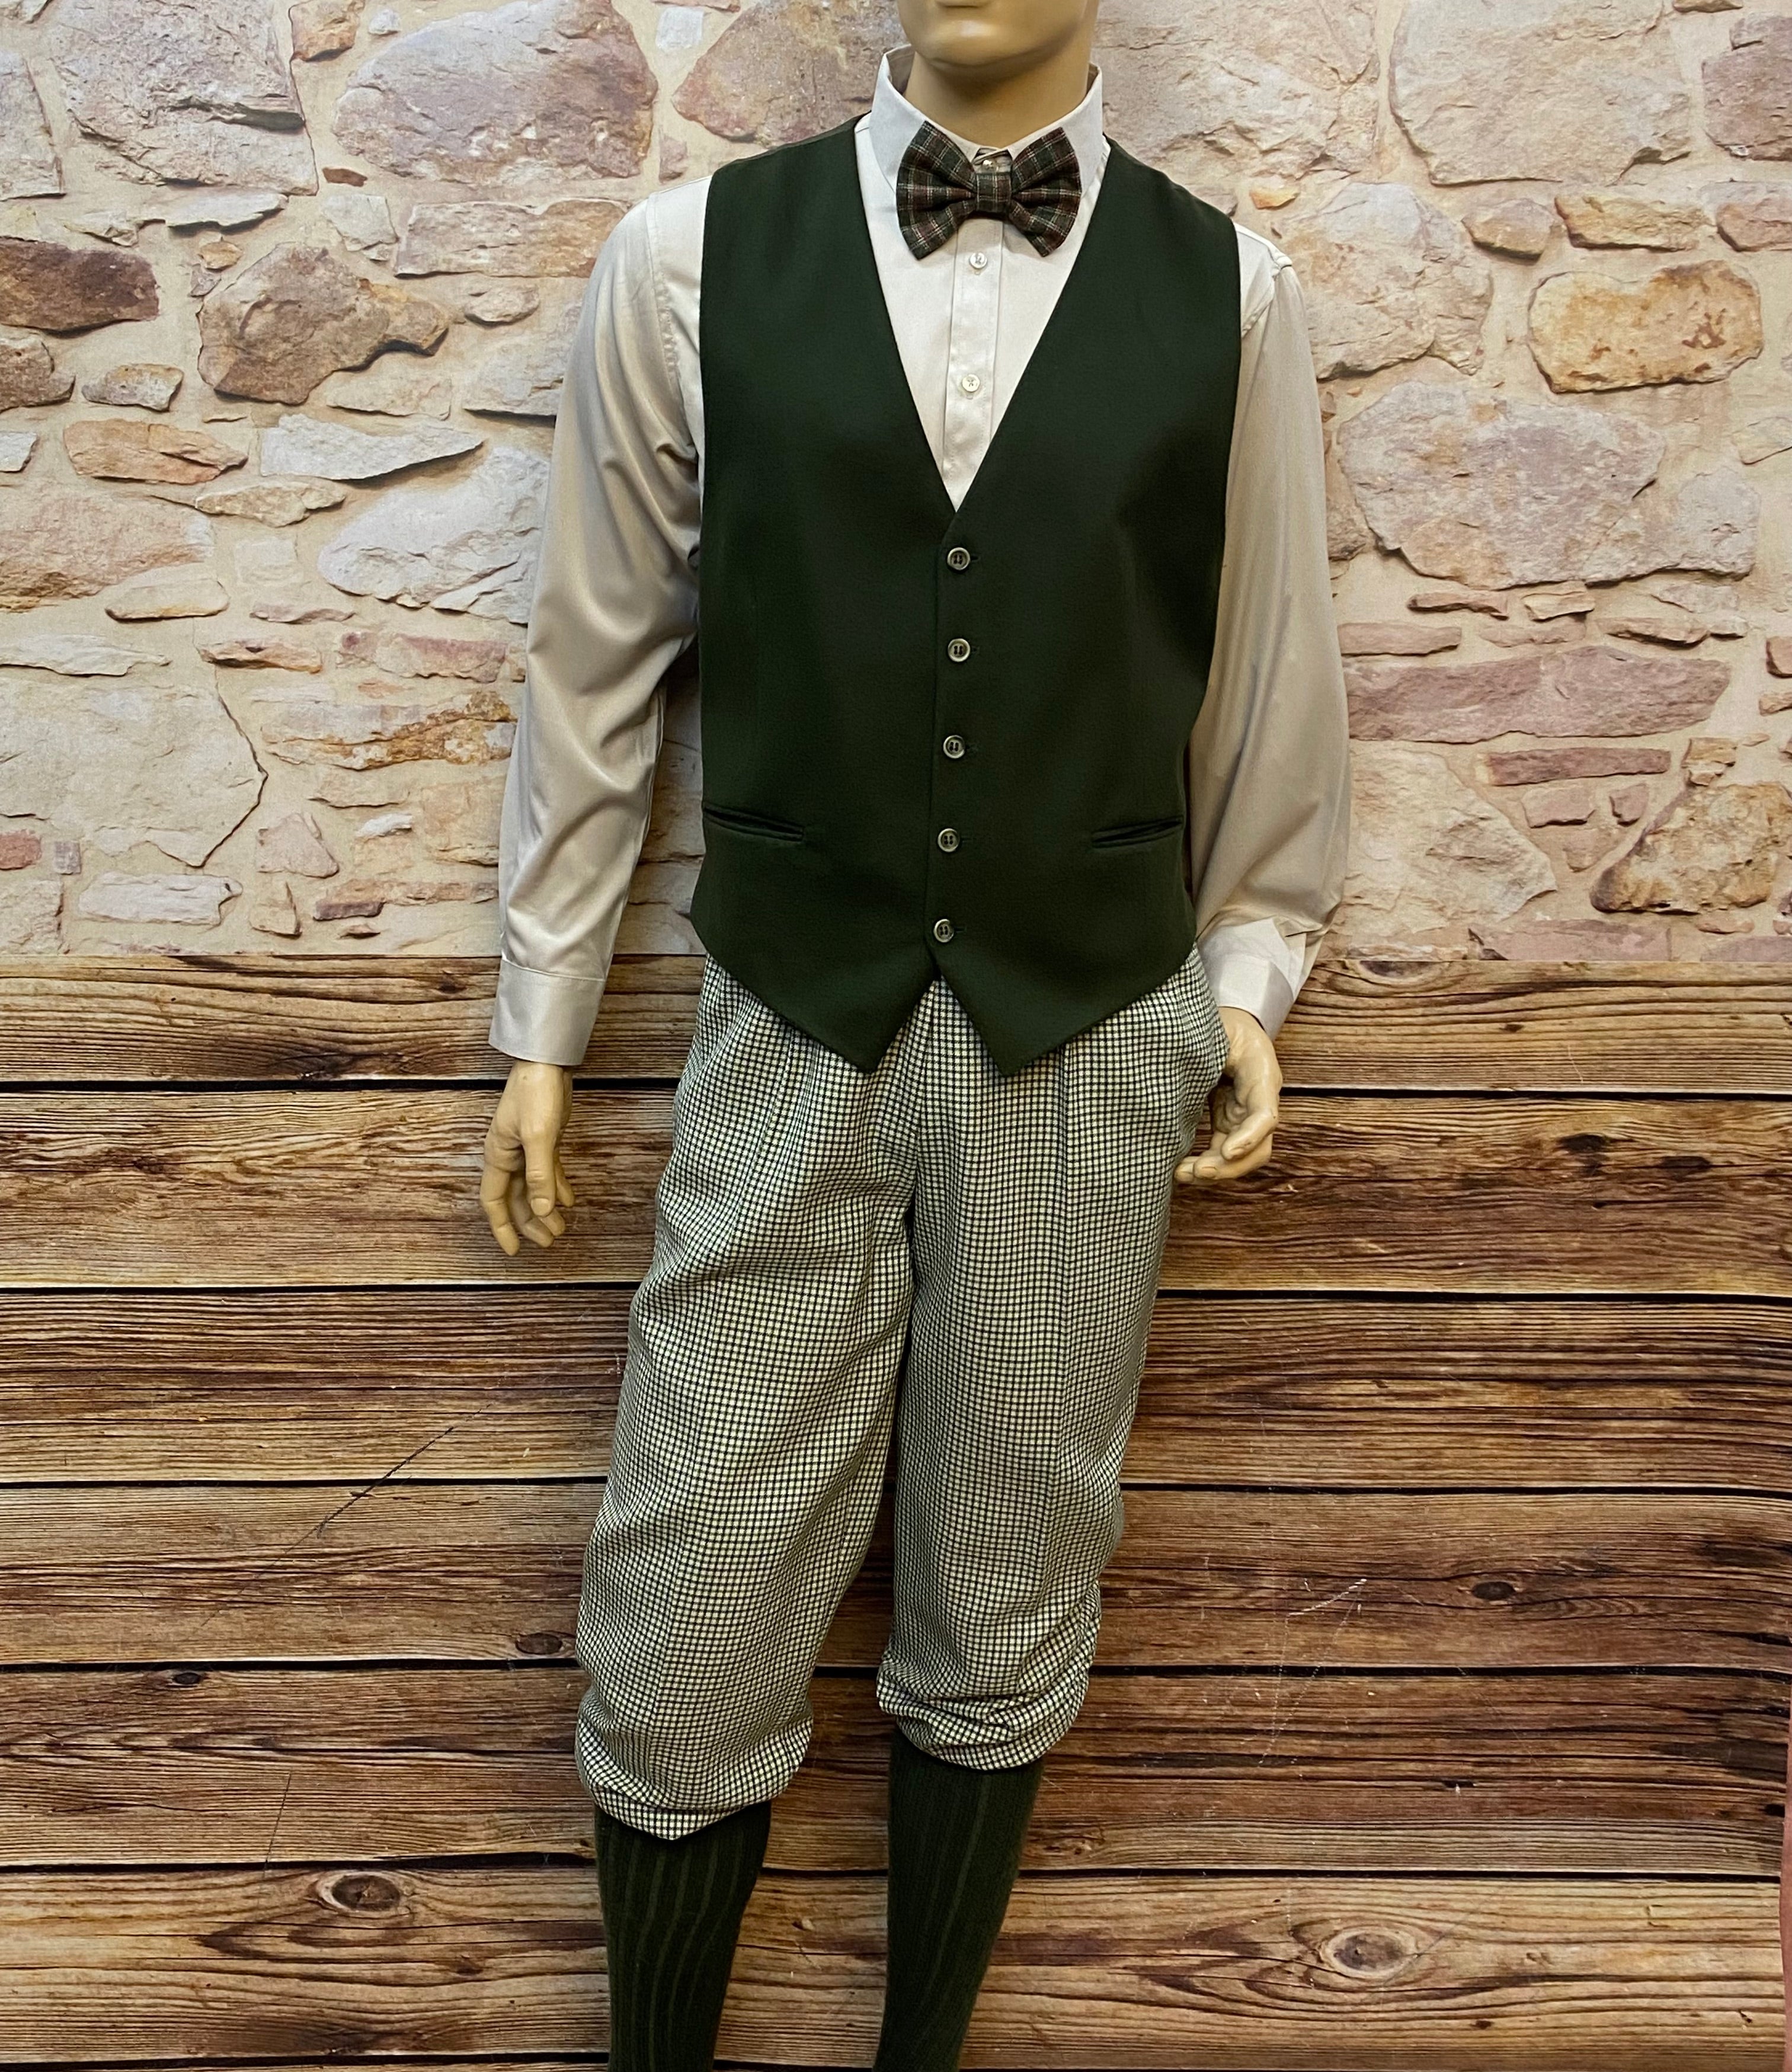 20er Jahre Outfit Oldtimer, Great Gatsby, Peaky Blinders  ca.Gr.52